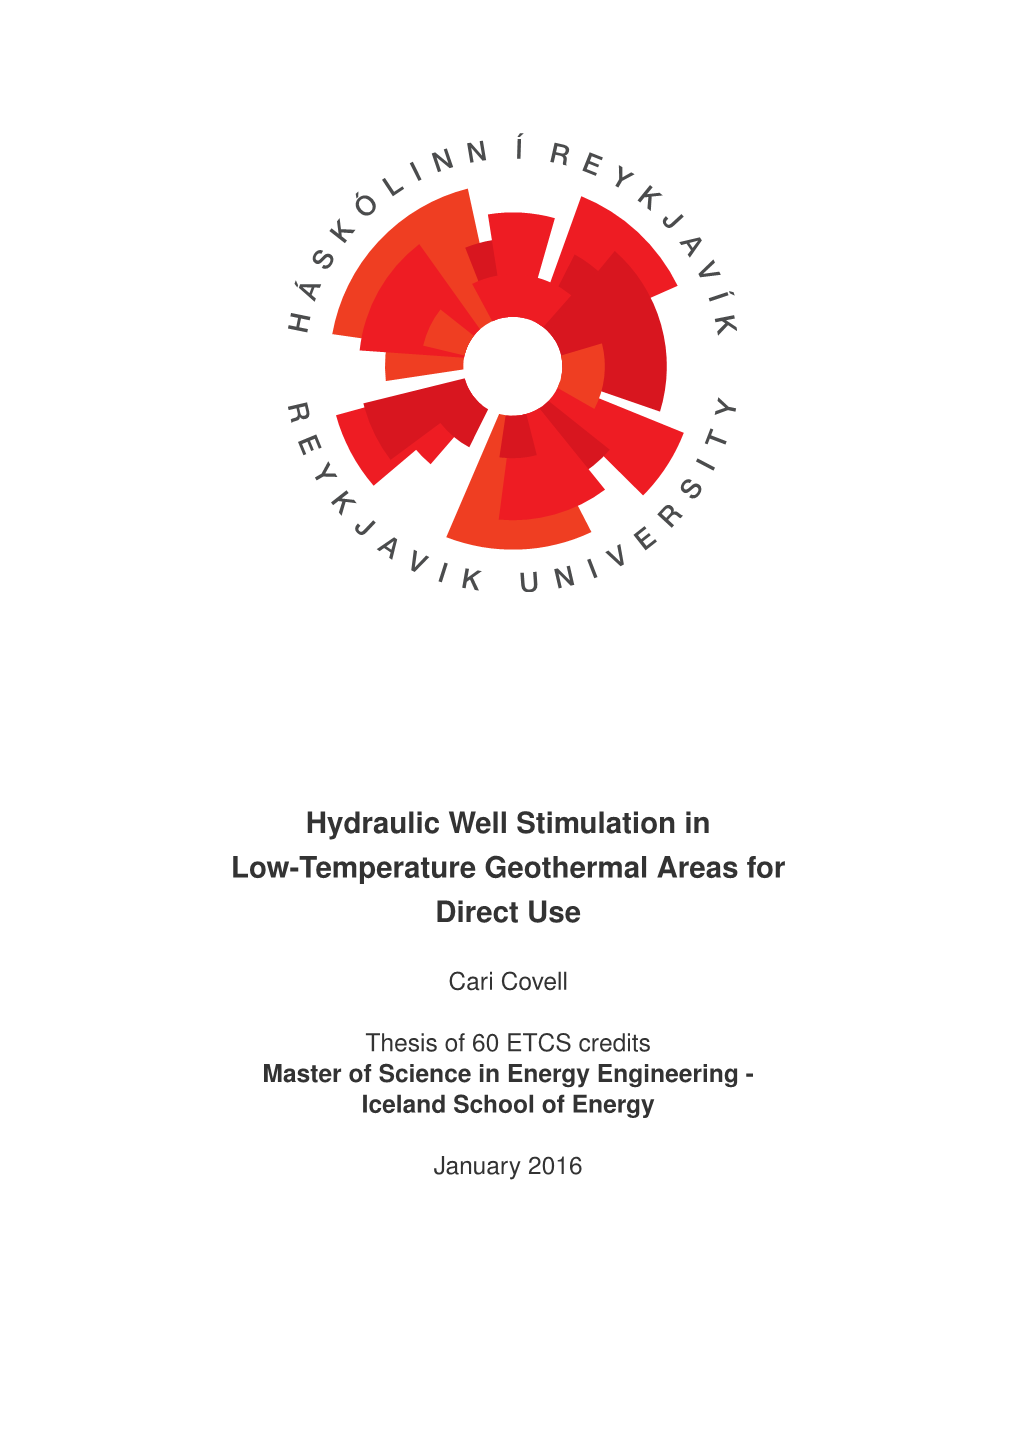 Hydraulic Well Stimulation in Low-Temperature Geothermal Areas for Direct Use